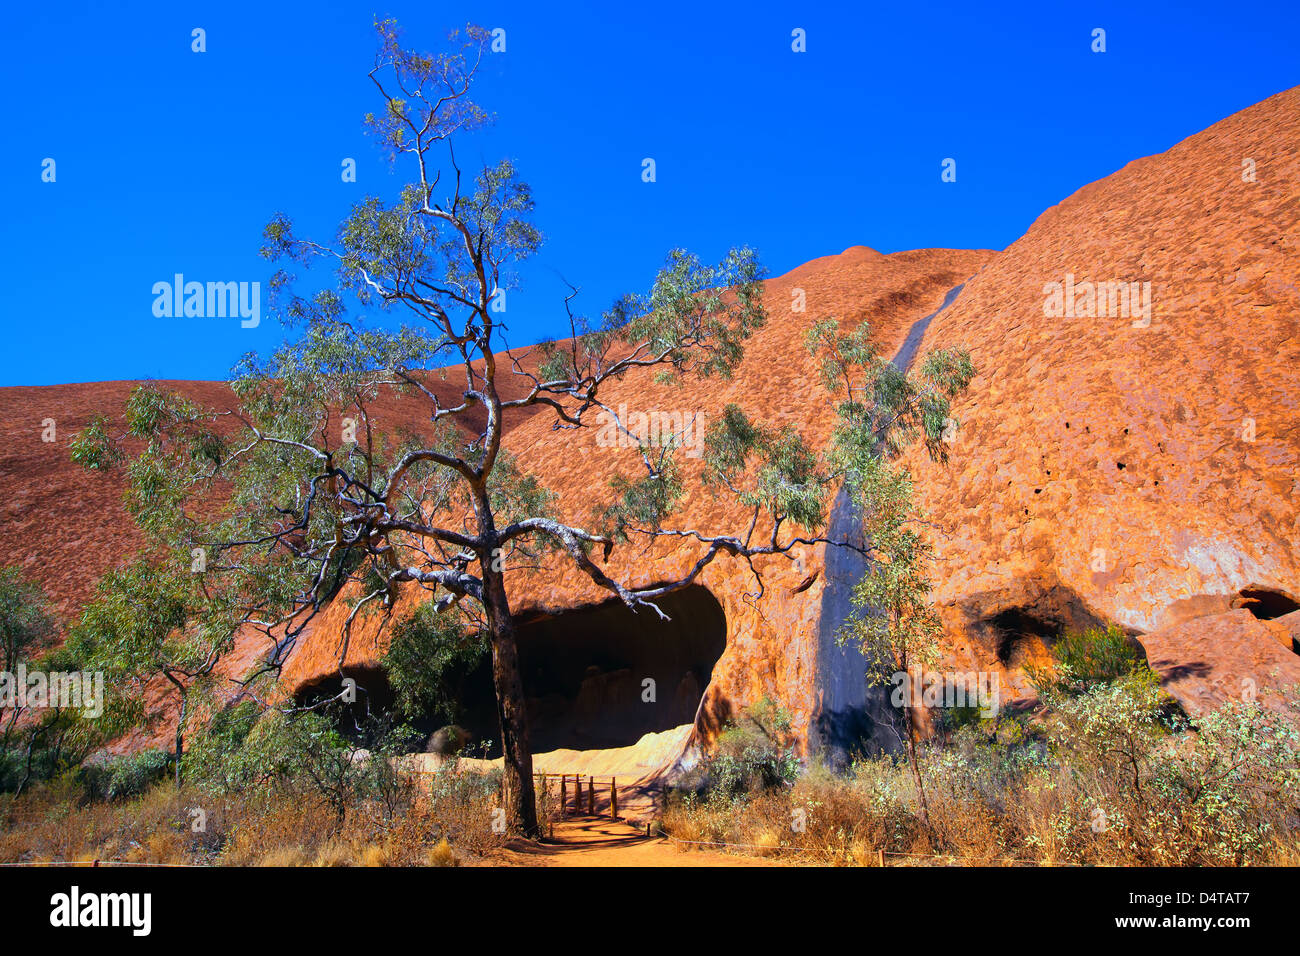 Outback central Australia Northern Territory Stock Photo